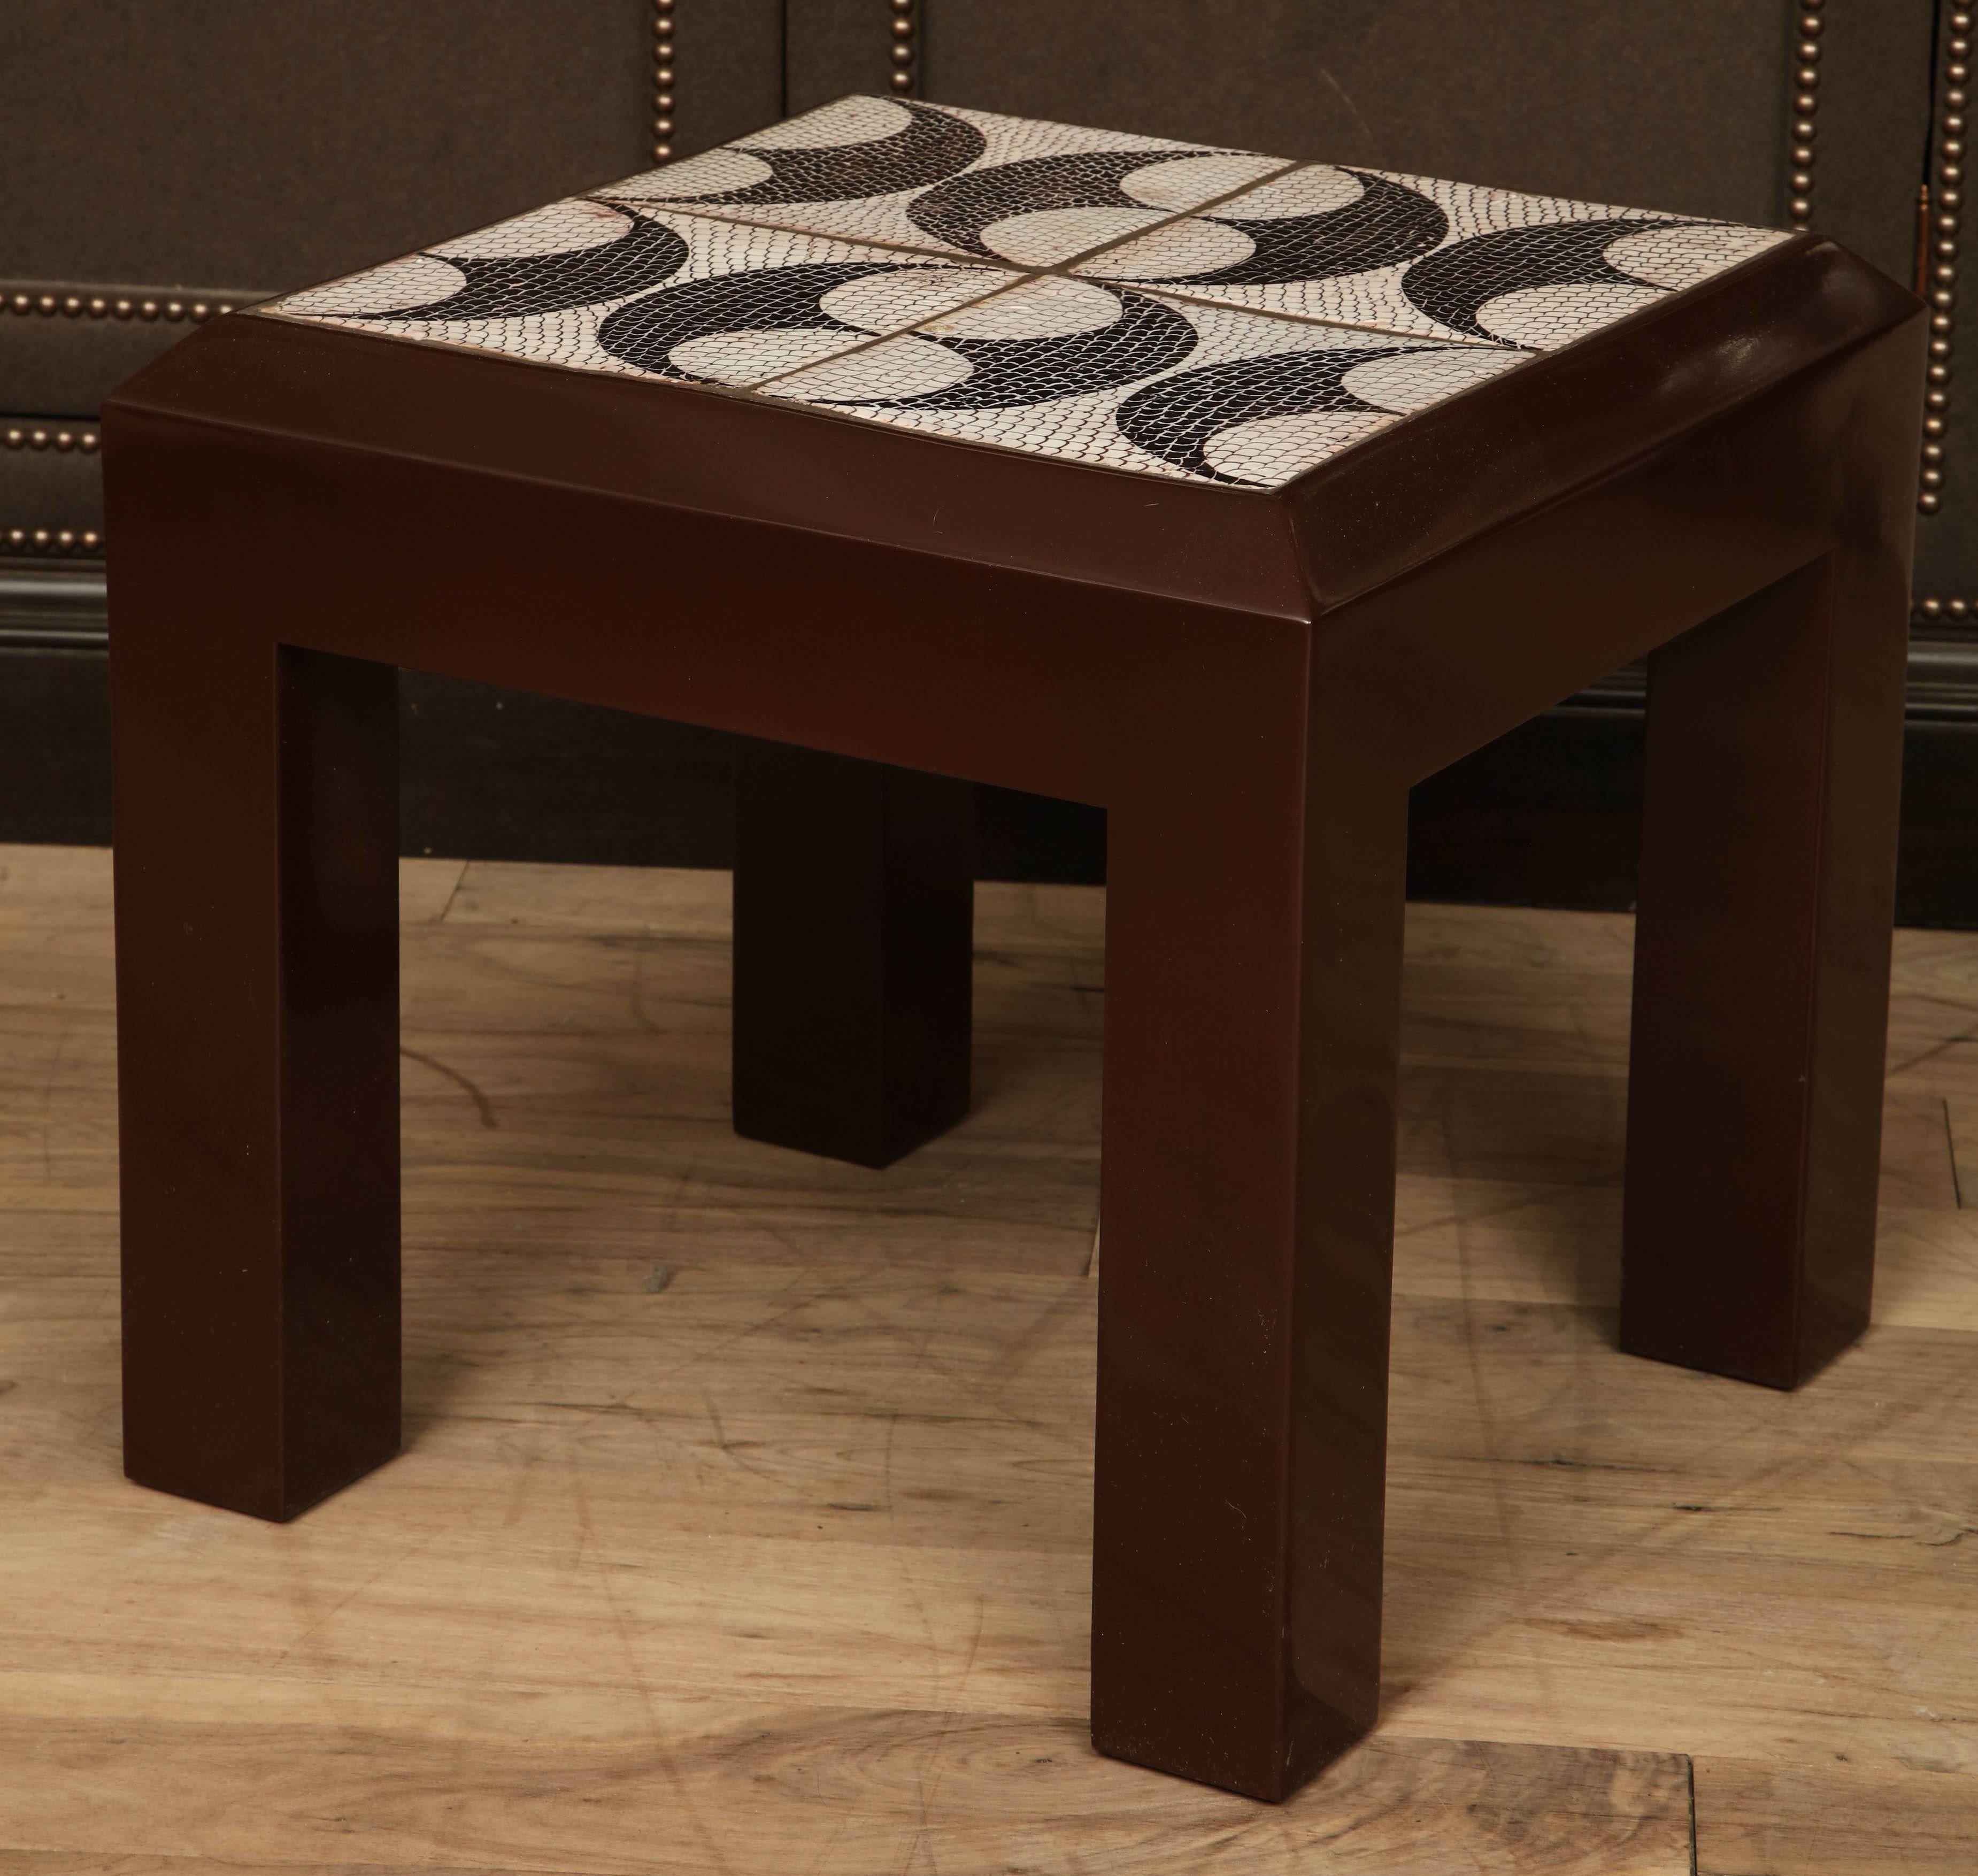 Lacquered maple side table with inset tile top with black and white fish scale and shield pattern, circa 1950.